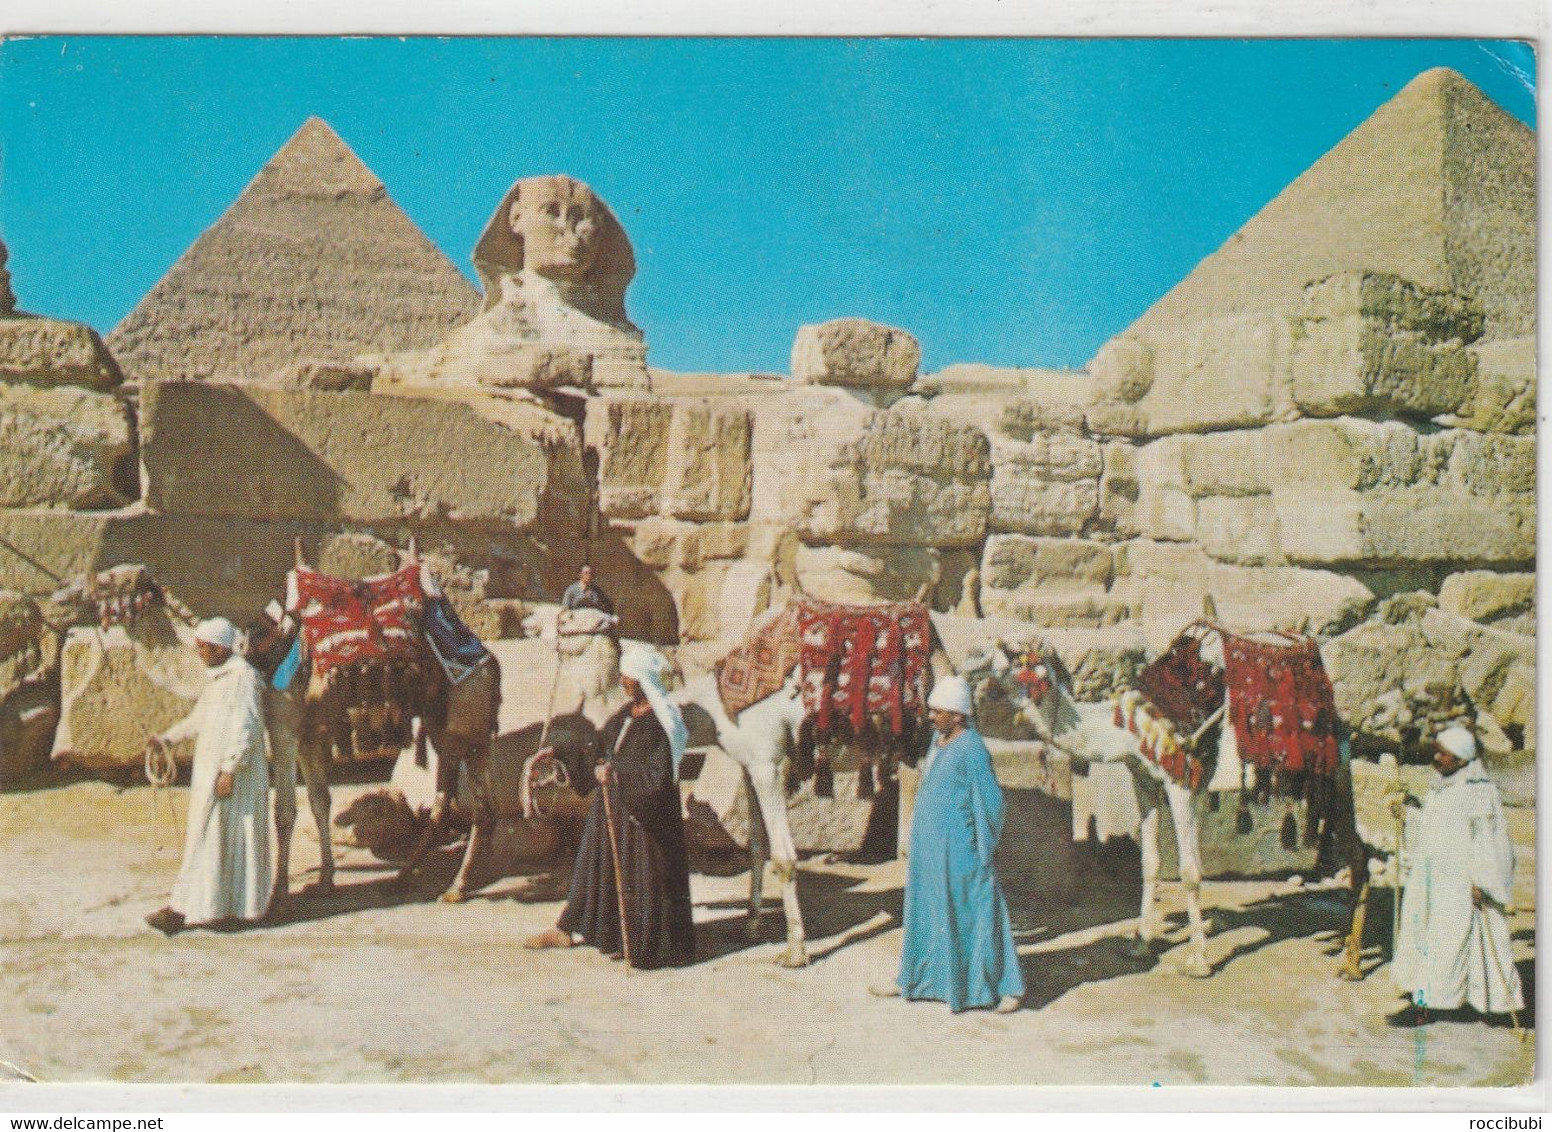 Giza, The Great Sphinx And Keops Pyramid - Gizeh